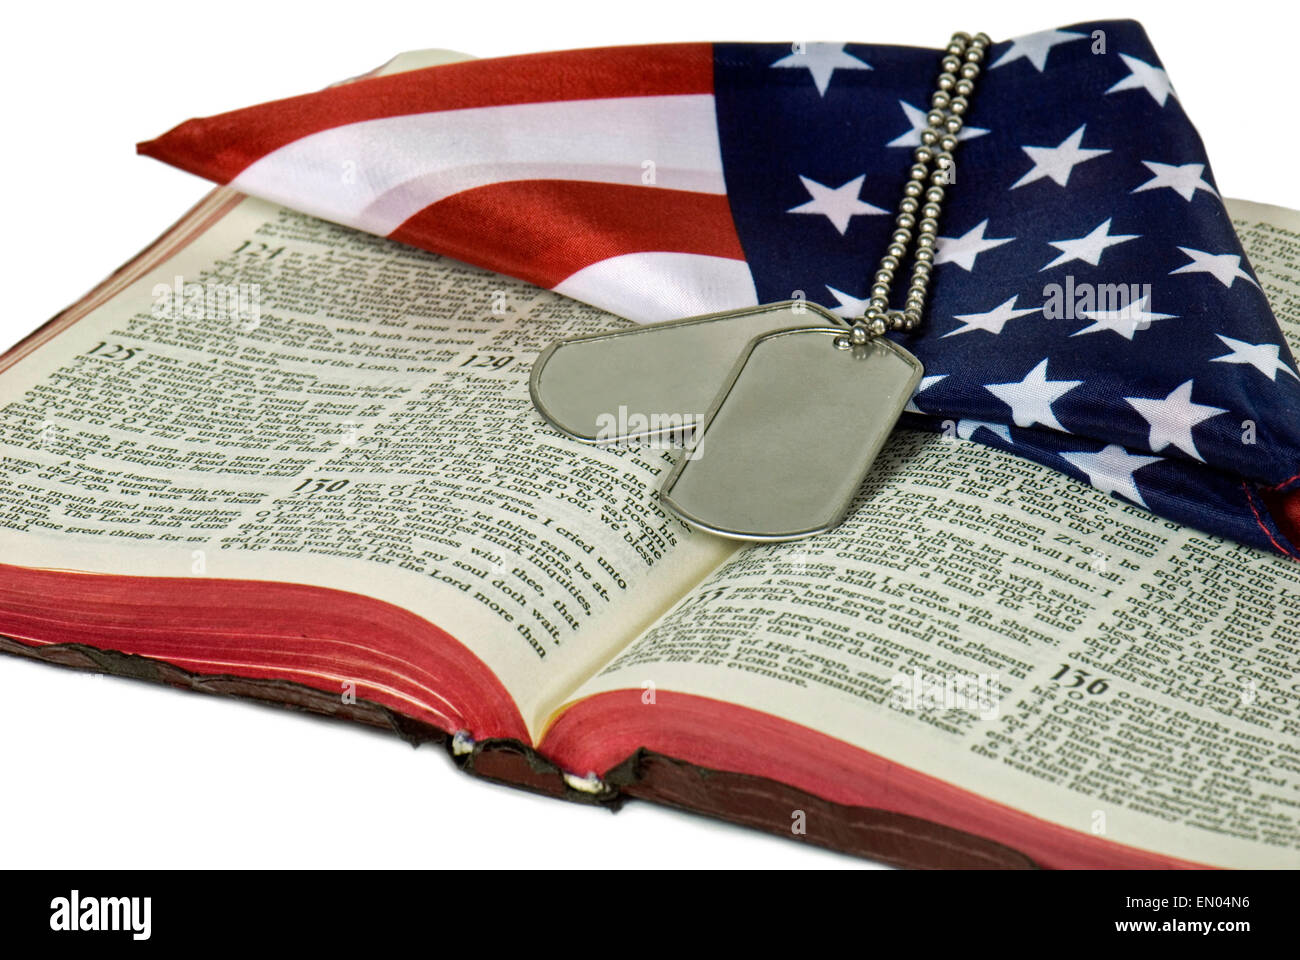 Military dog tags on open Bible with folded American flag isolated on white. Stock Photo